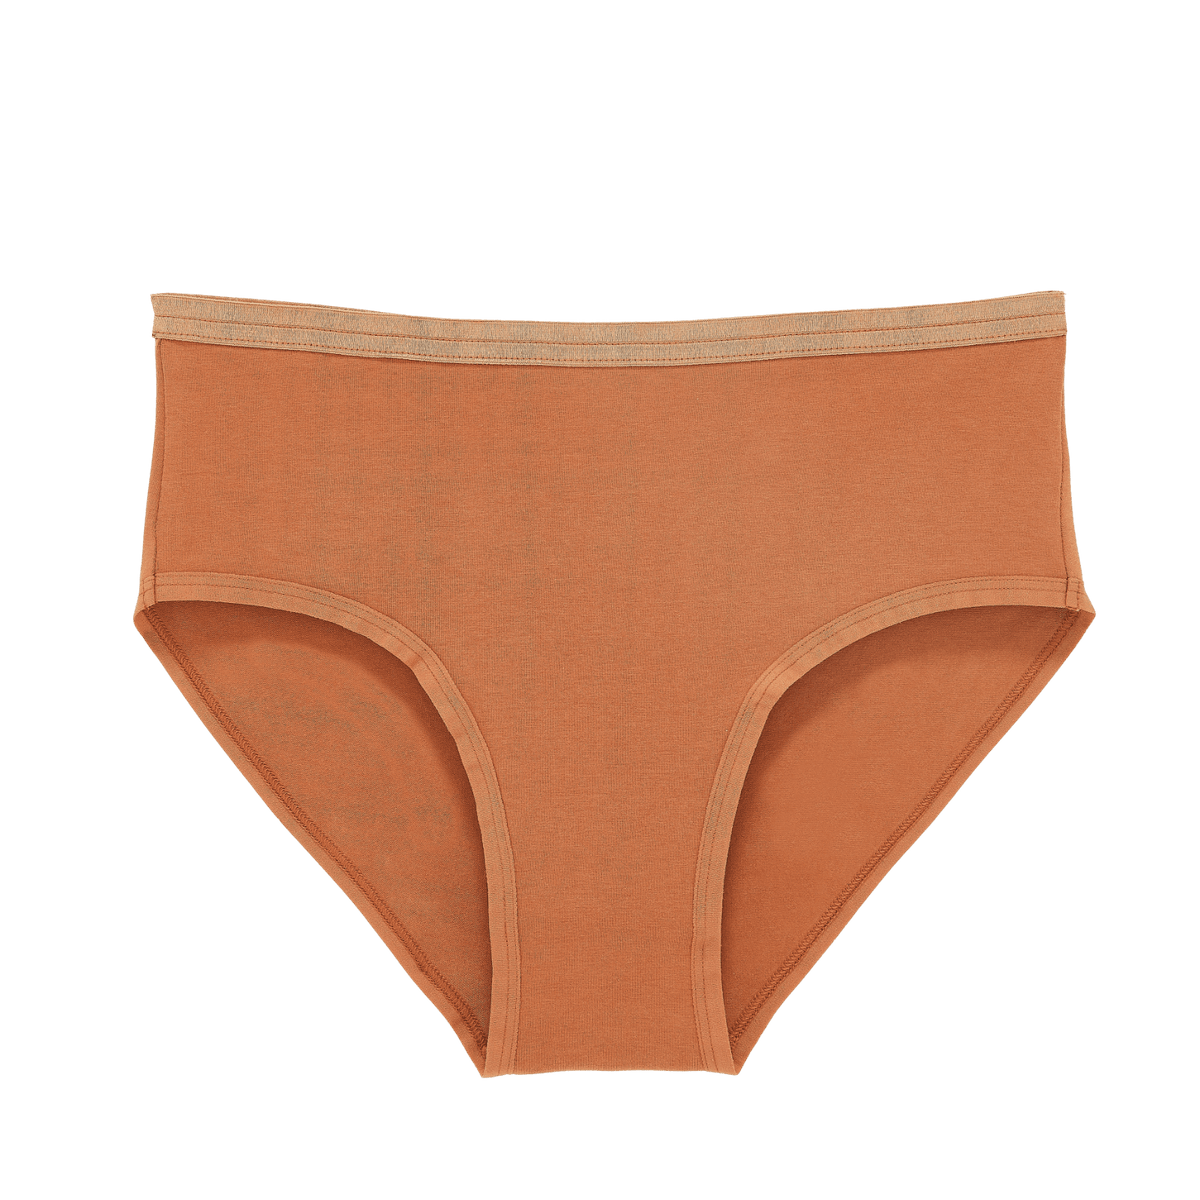 Knickey | Our Materials | Organic Cotton Underwear | Knickey